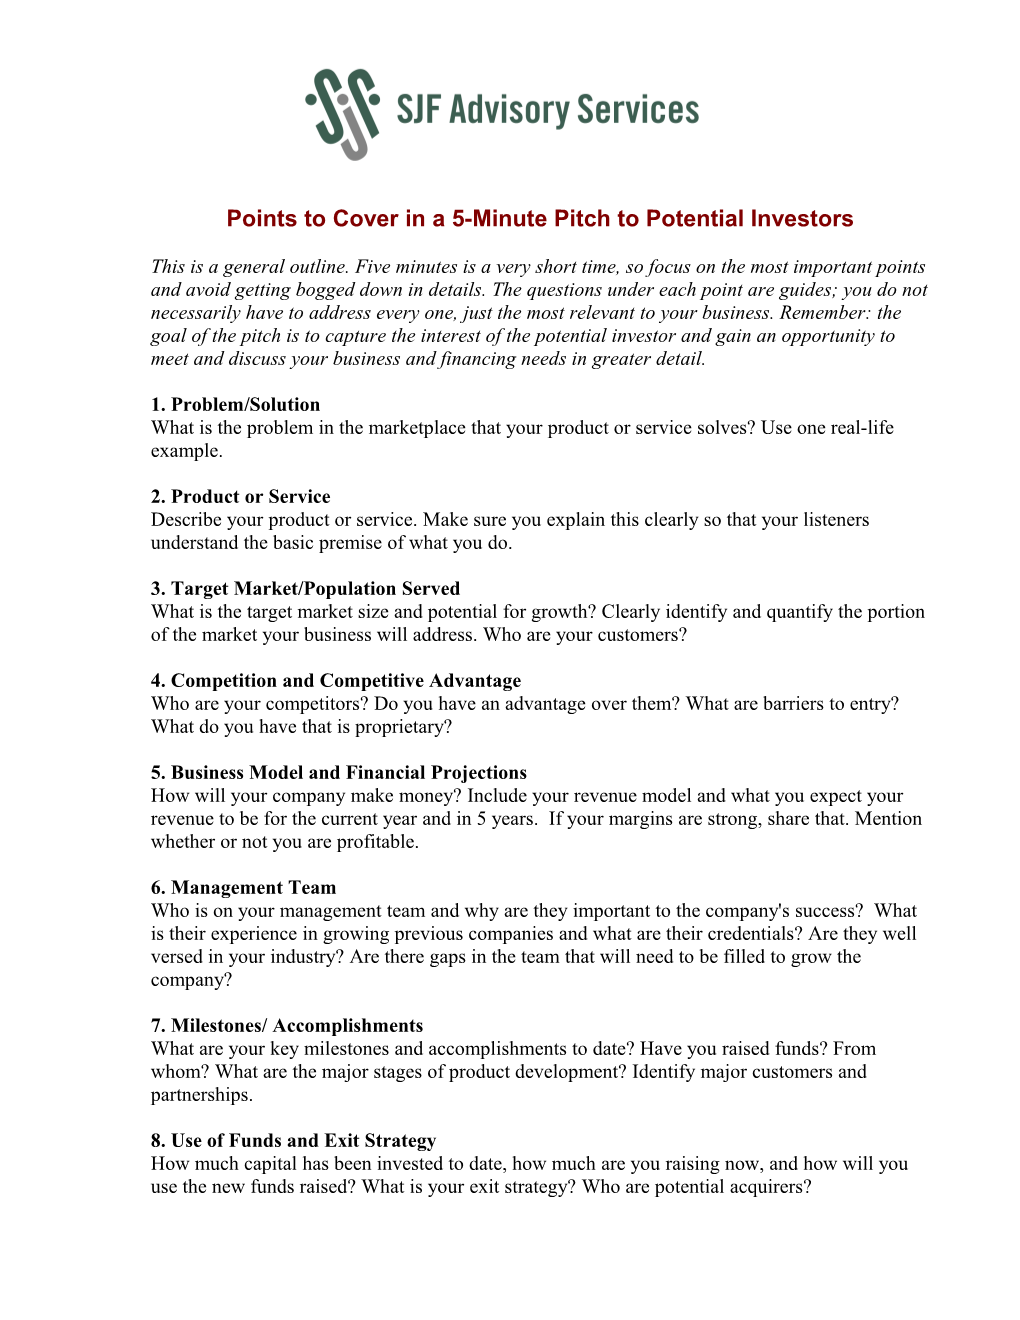 Points to Cover in 5 Minute Pitch to Potential Investors